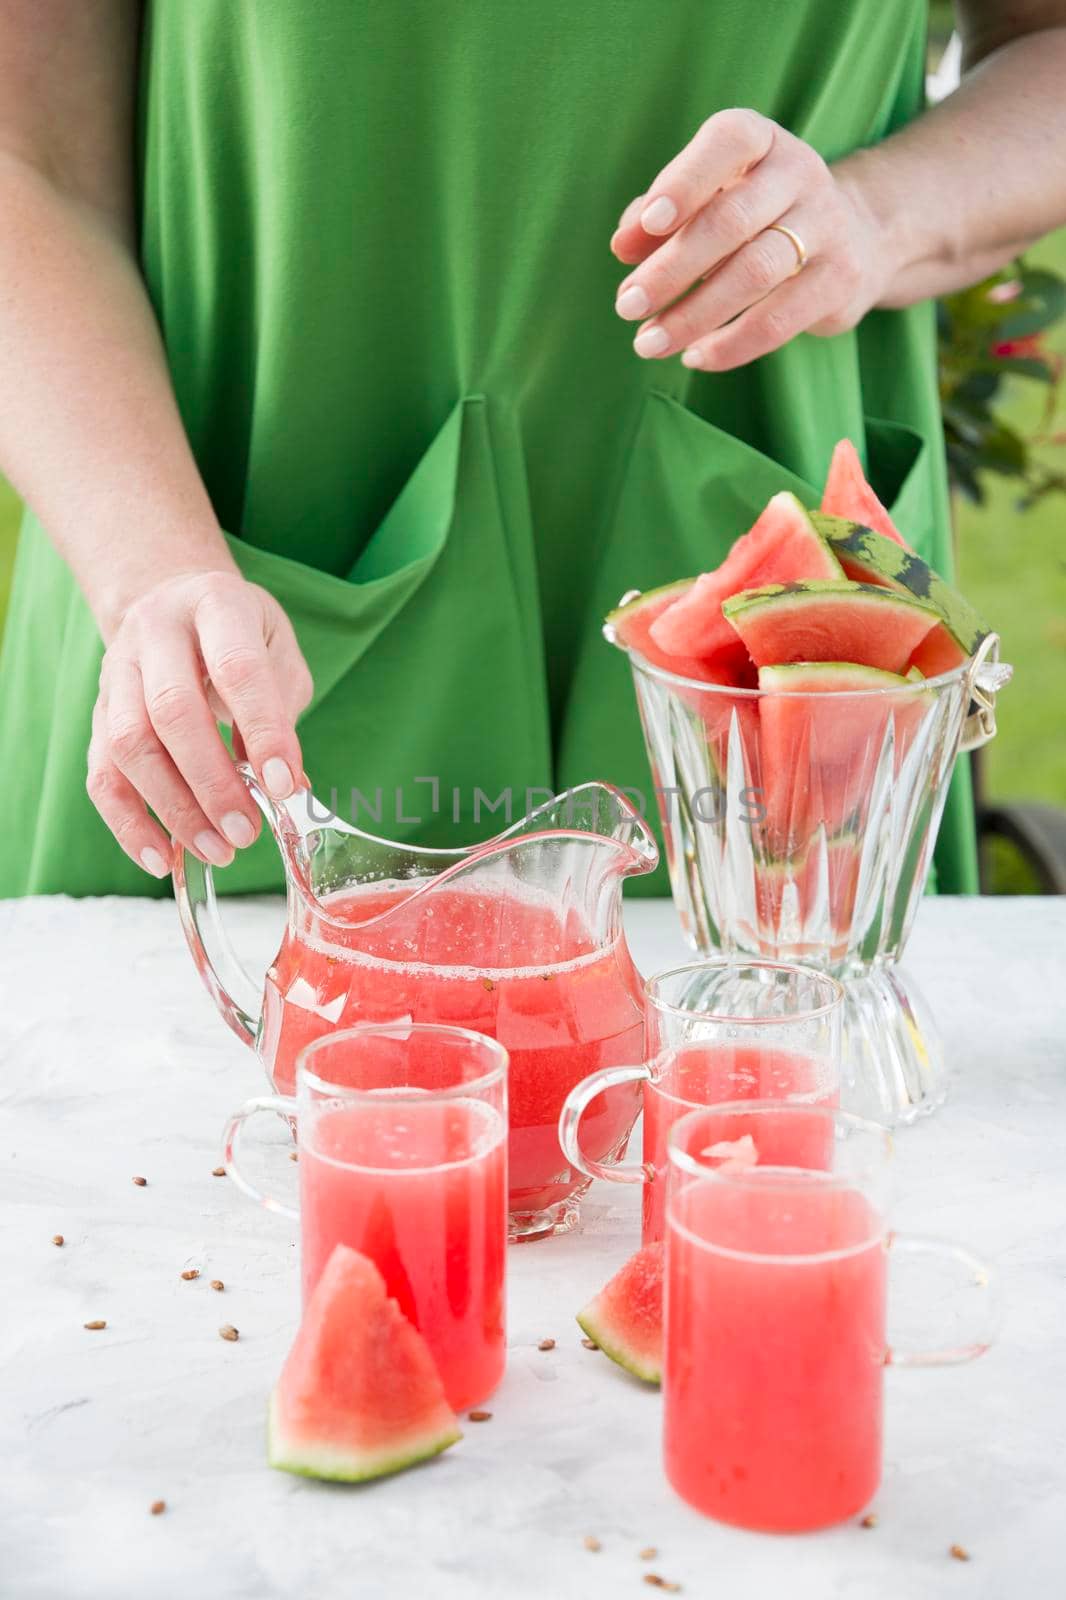 a woman in a green dress pours a red refreshing drink from the pulp of a watermelon into a glass glass, bright natural background